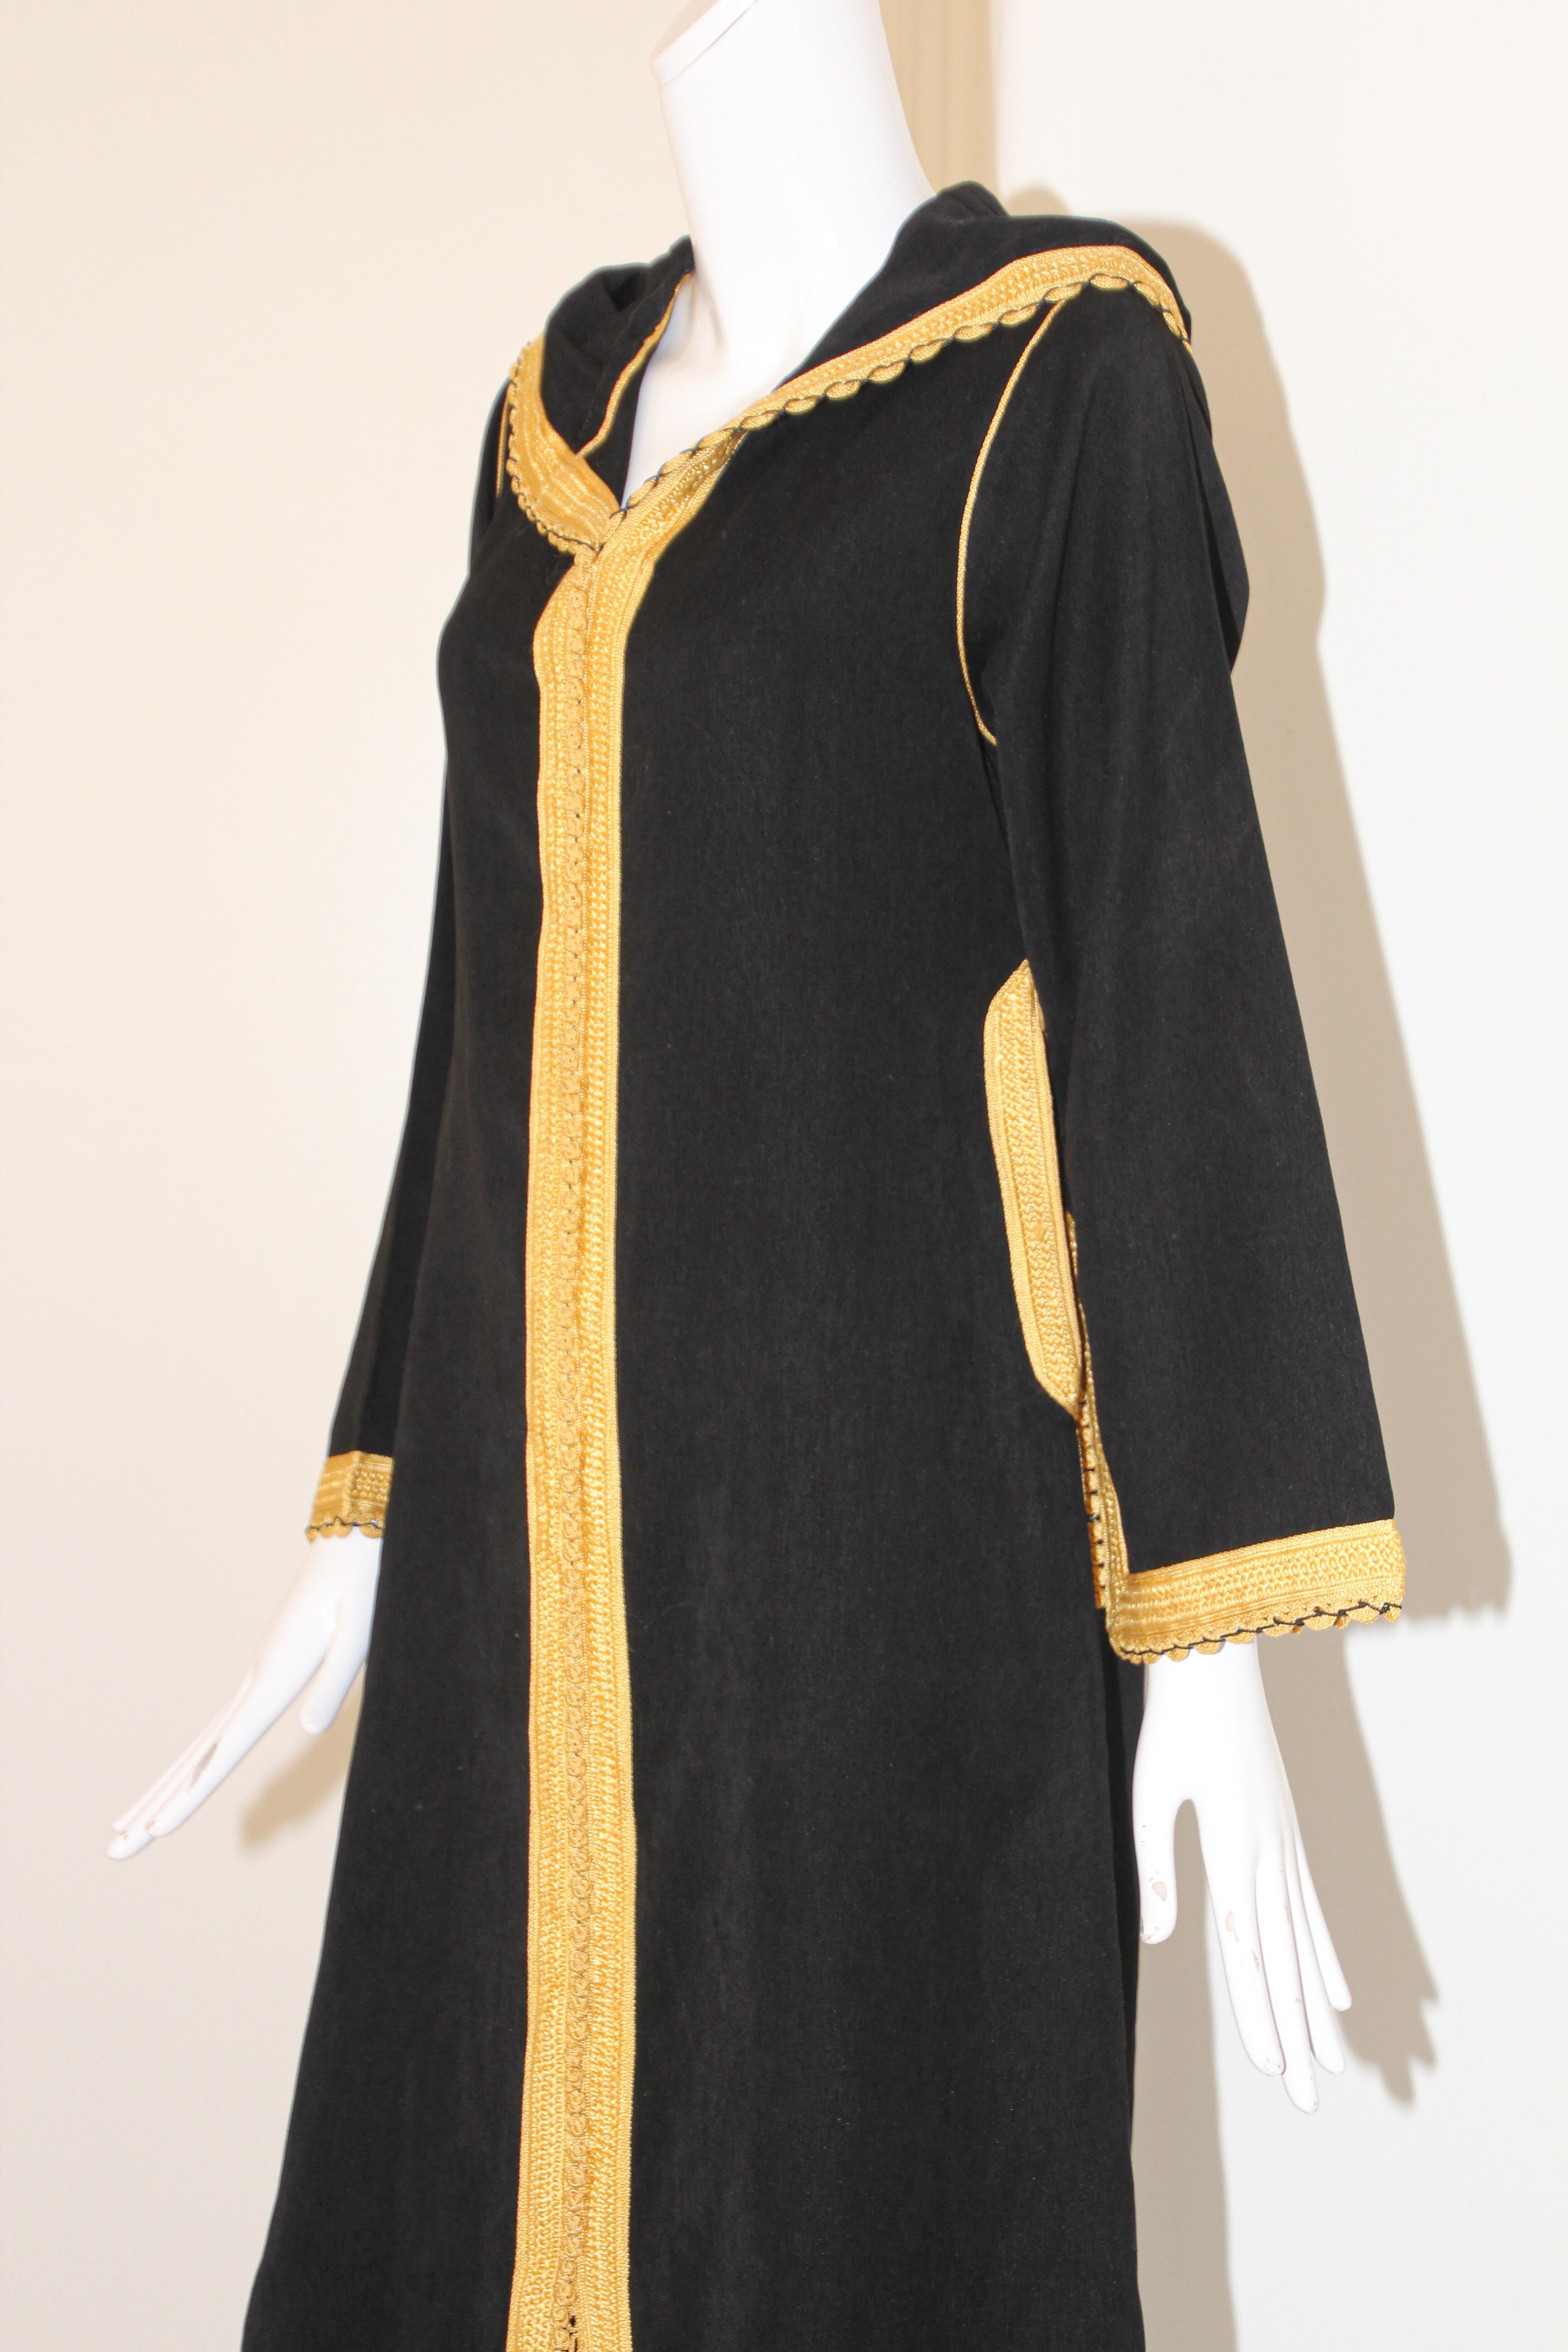 20th Century Vintage Moroccan Caftan, Hooded Black and Gold Trim Kaftan Circa 1970's For Sale